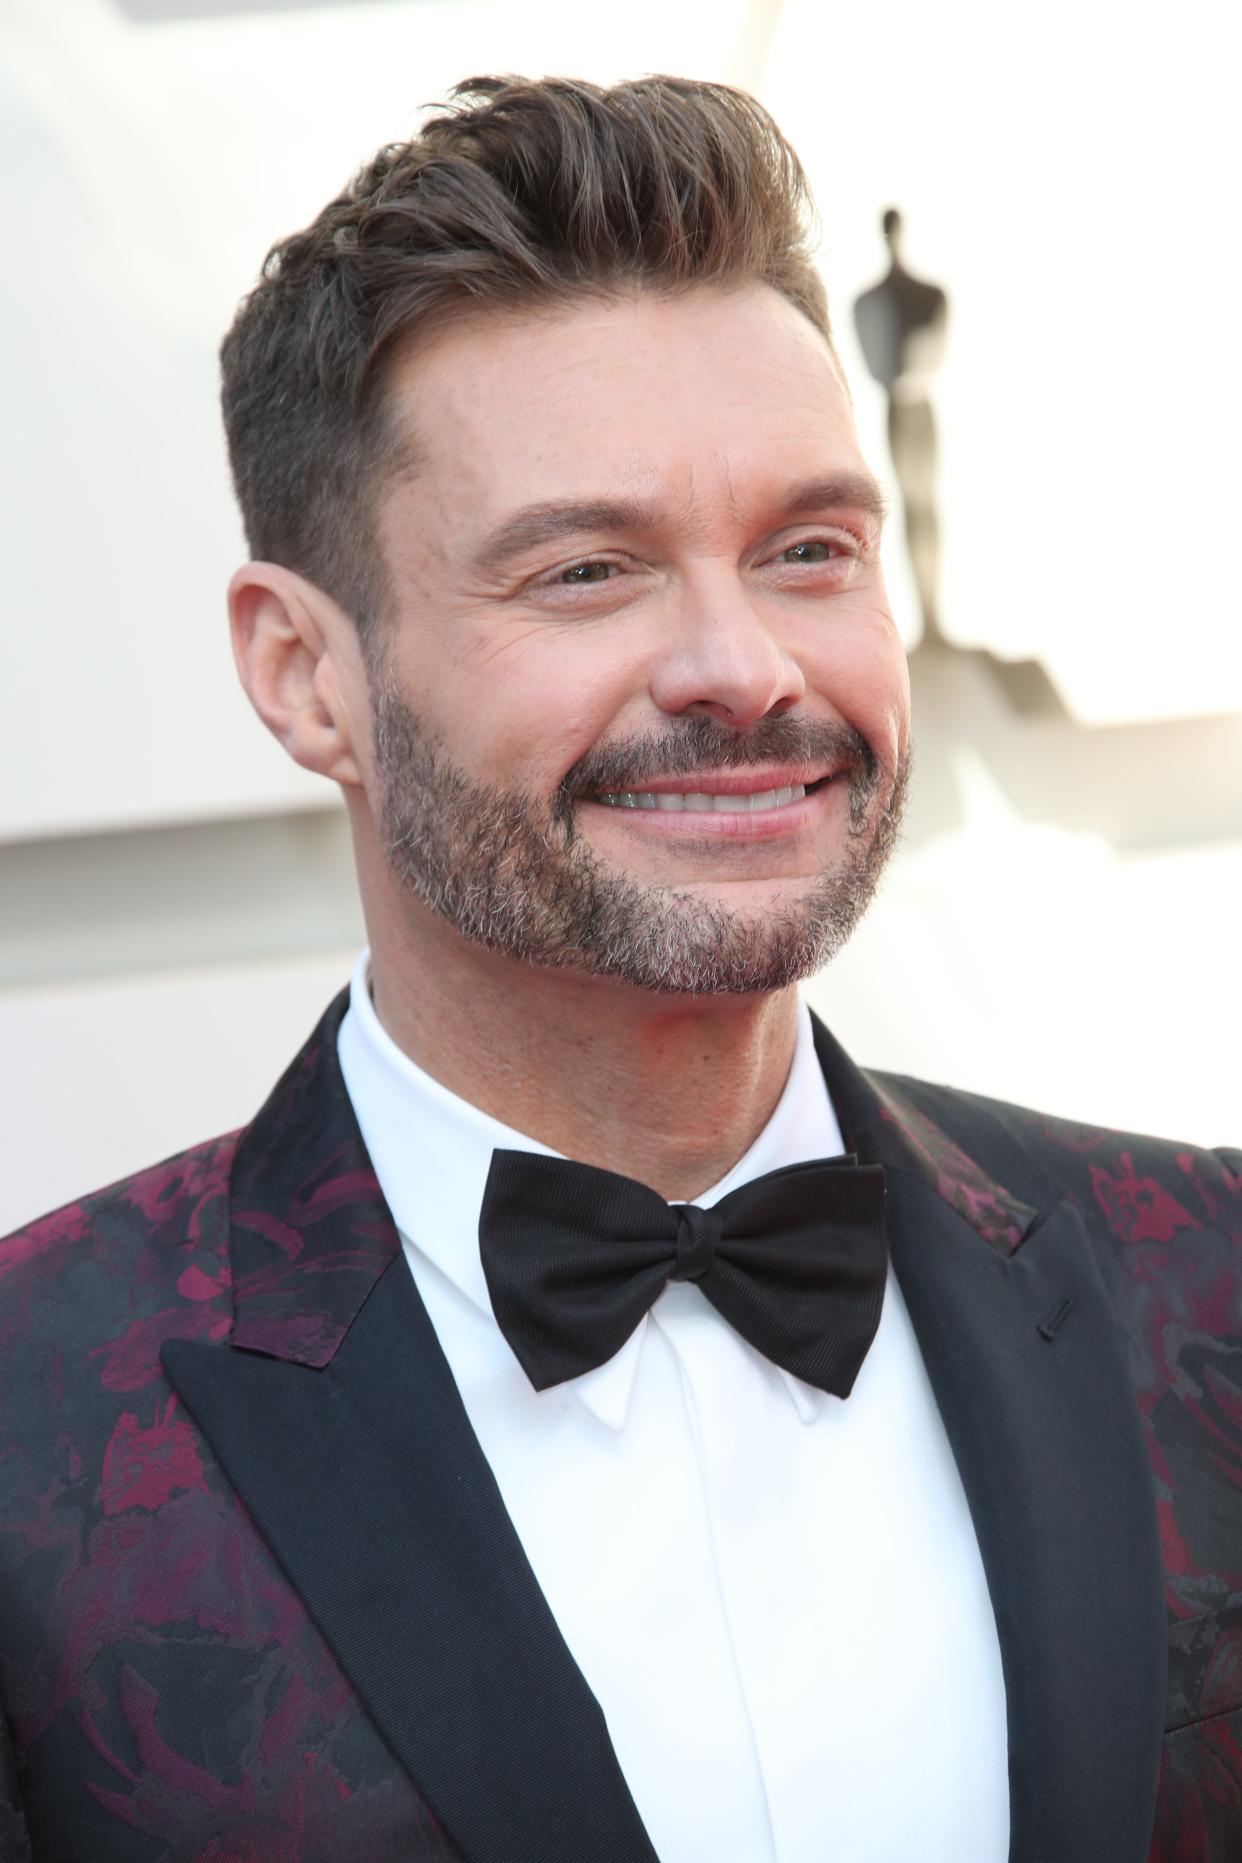 Ryan Seacrest at the 2019 Oscars. Hosting "New Year's Rockin' Eve" the 17th time has taught him to layer up.  "I have engineered this architectural layer, or three, of thermals," he says. "I have to remember during the fitting that I'll have these three layers of thermals around my waist."